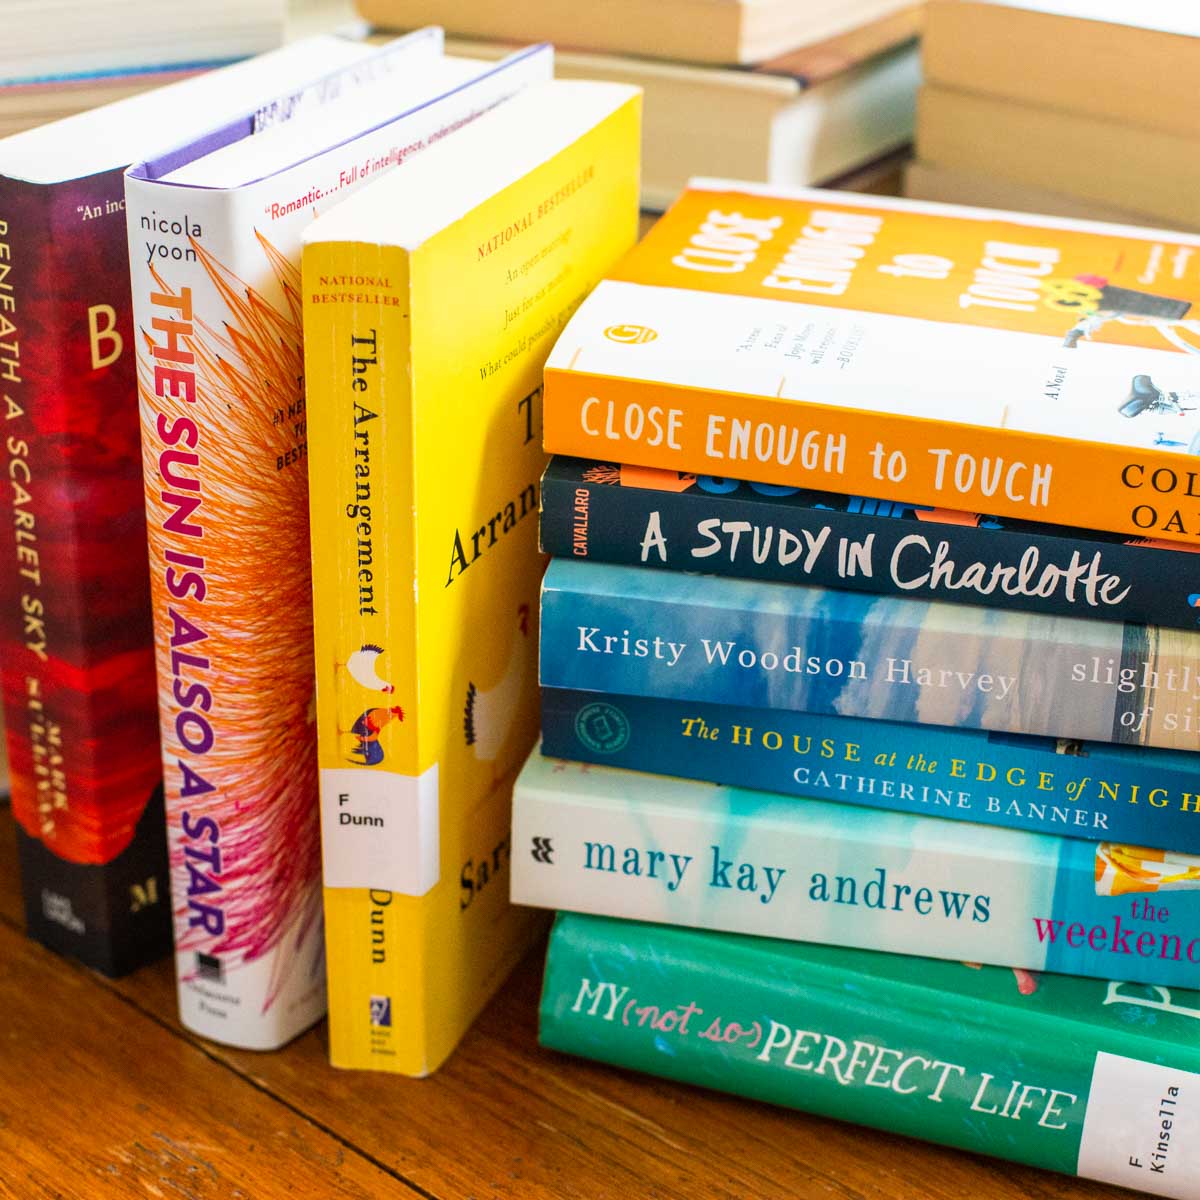 A stack of colorful books is on the table.